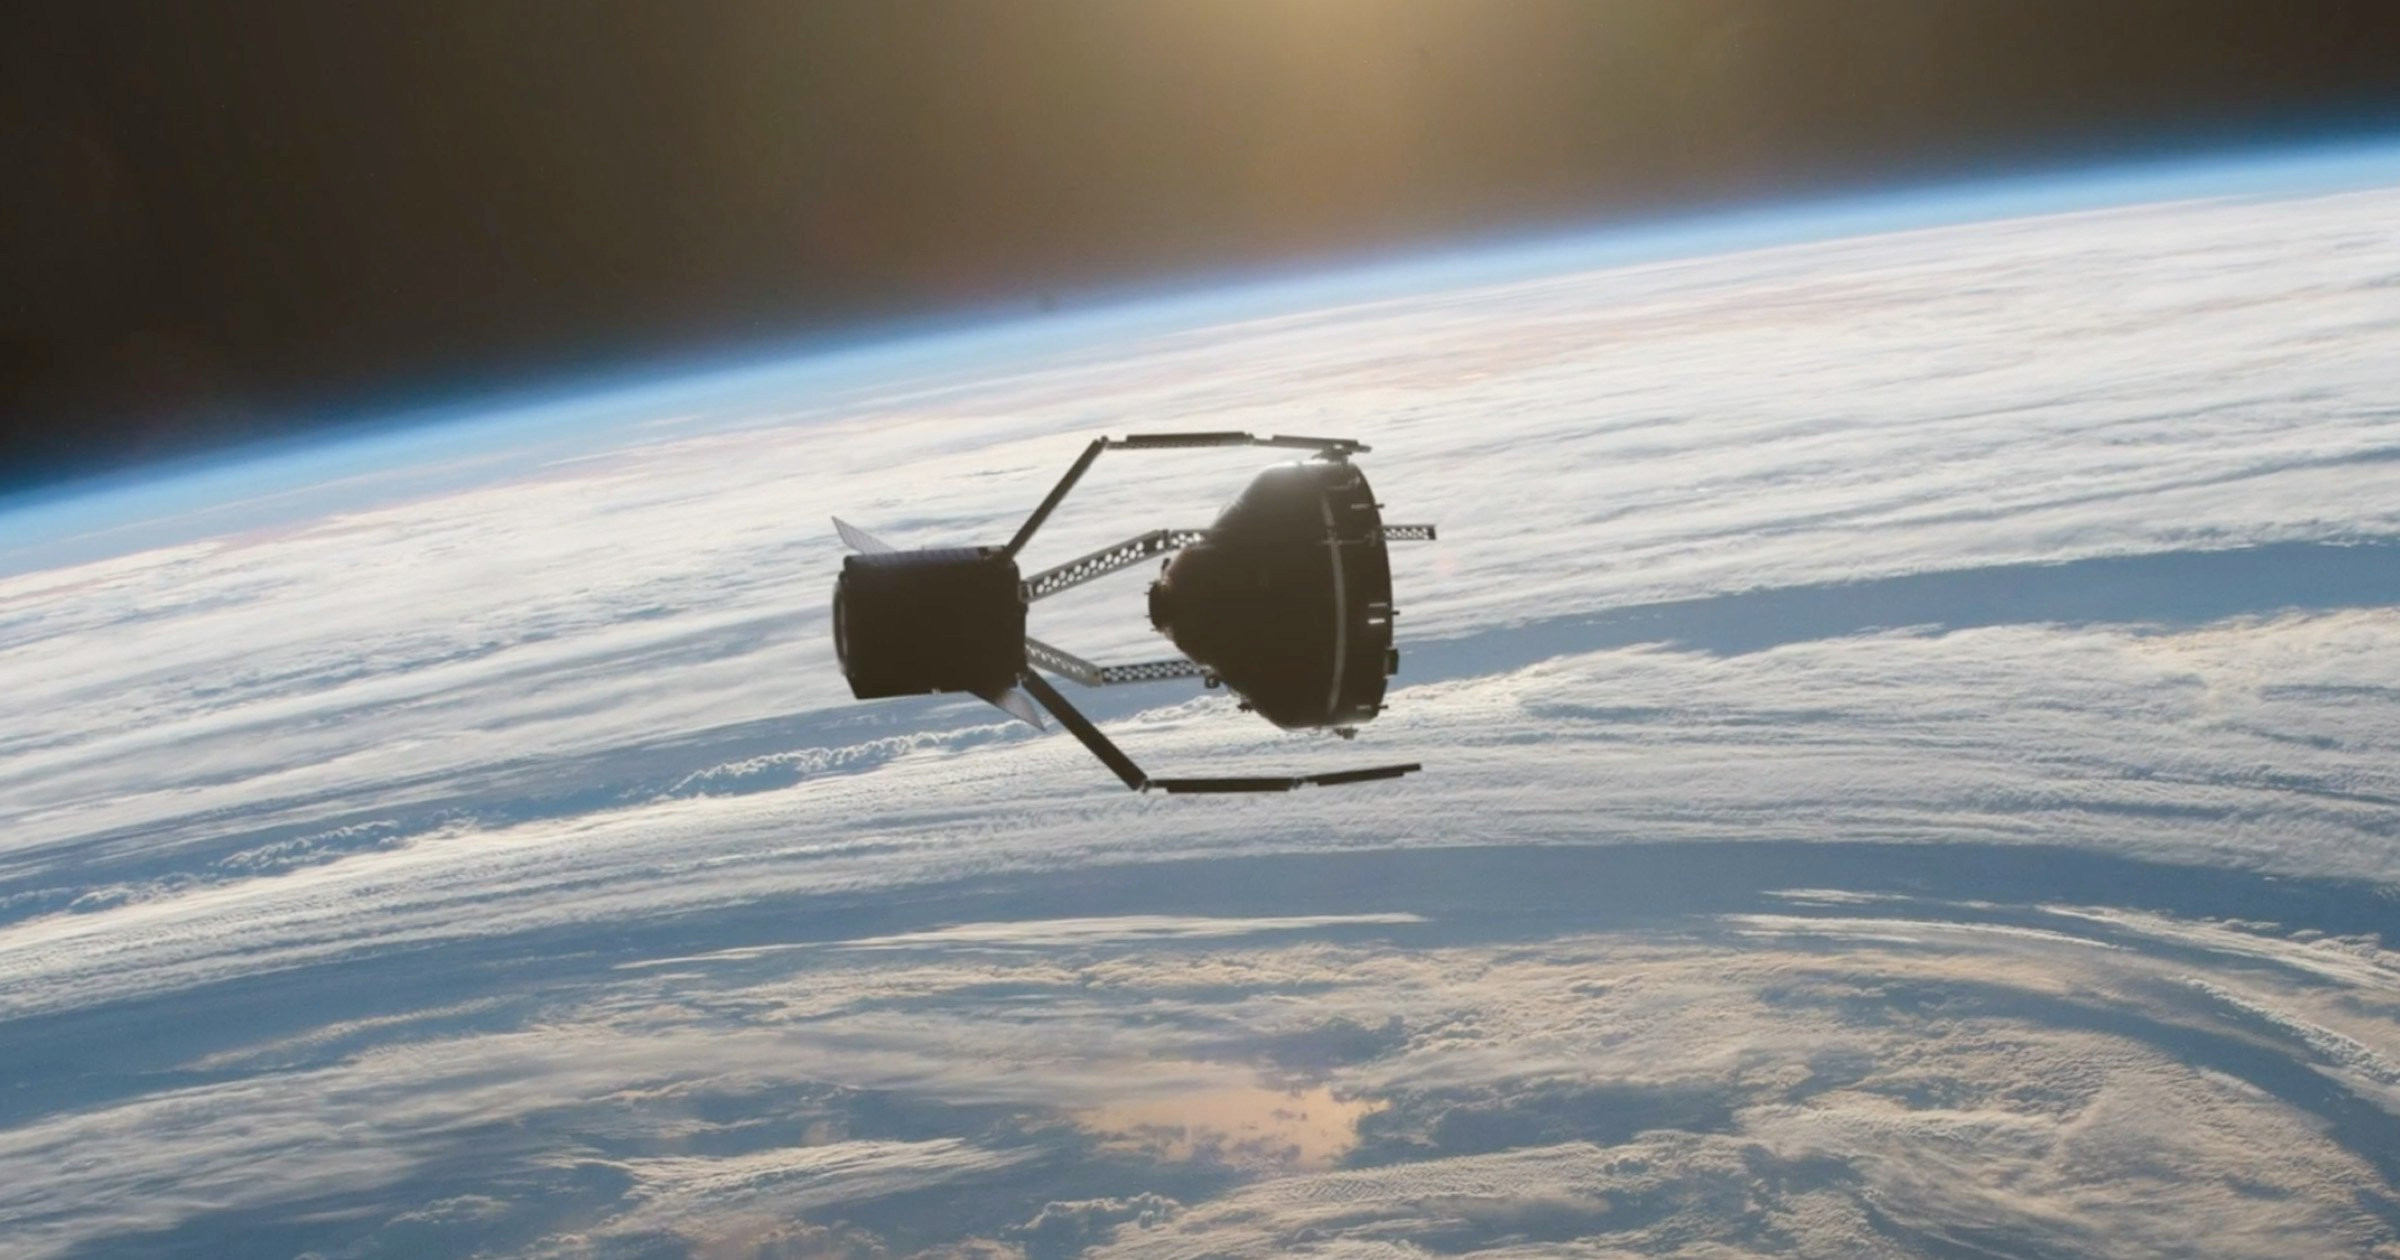 Elecnor Deimos to Build the ‘Claw’ for the UK Space Agency’s Mission to Clear Space Debris